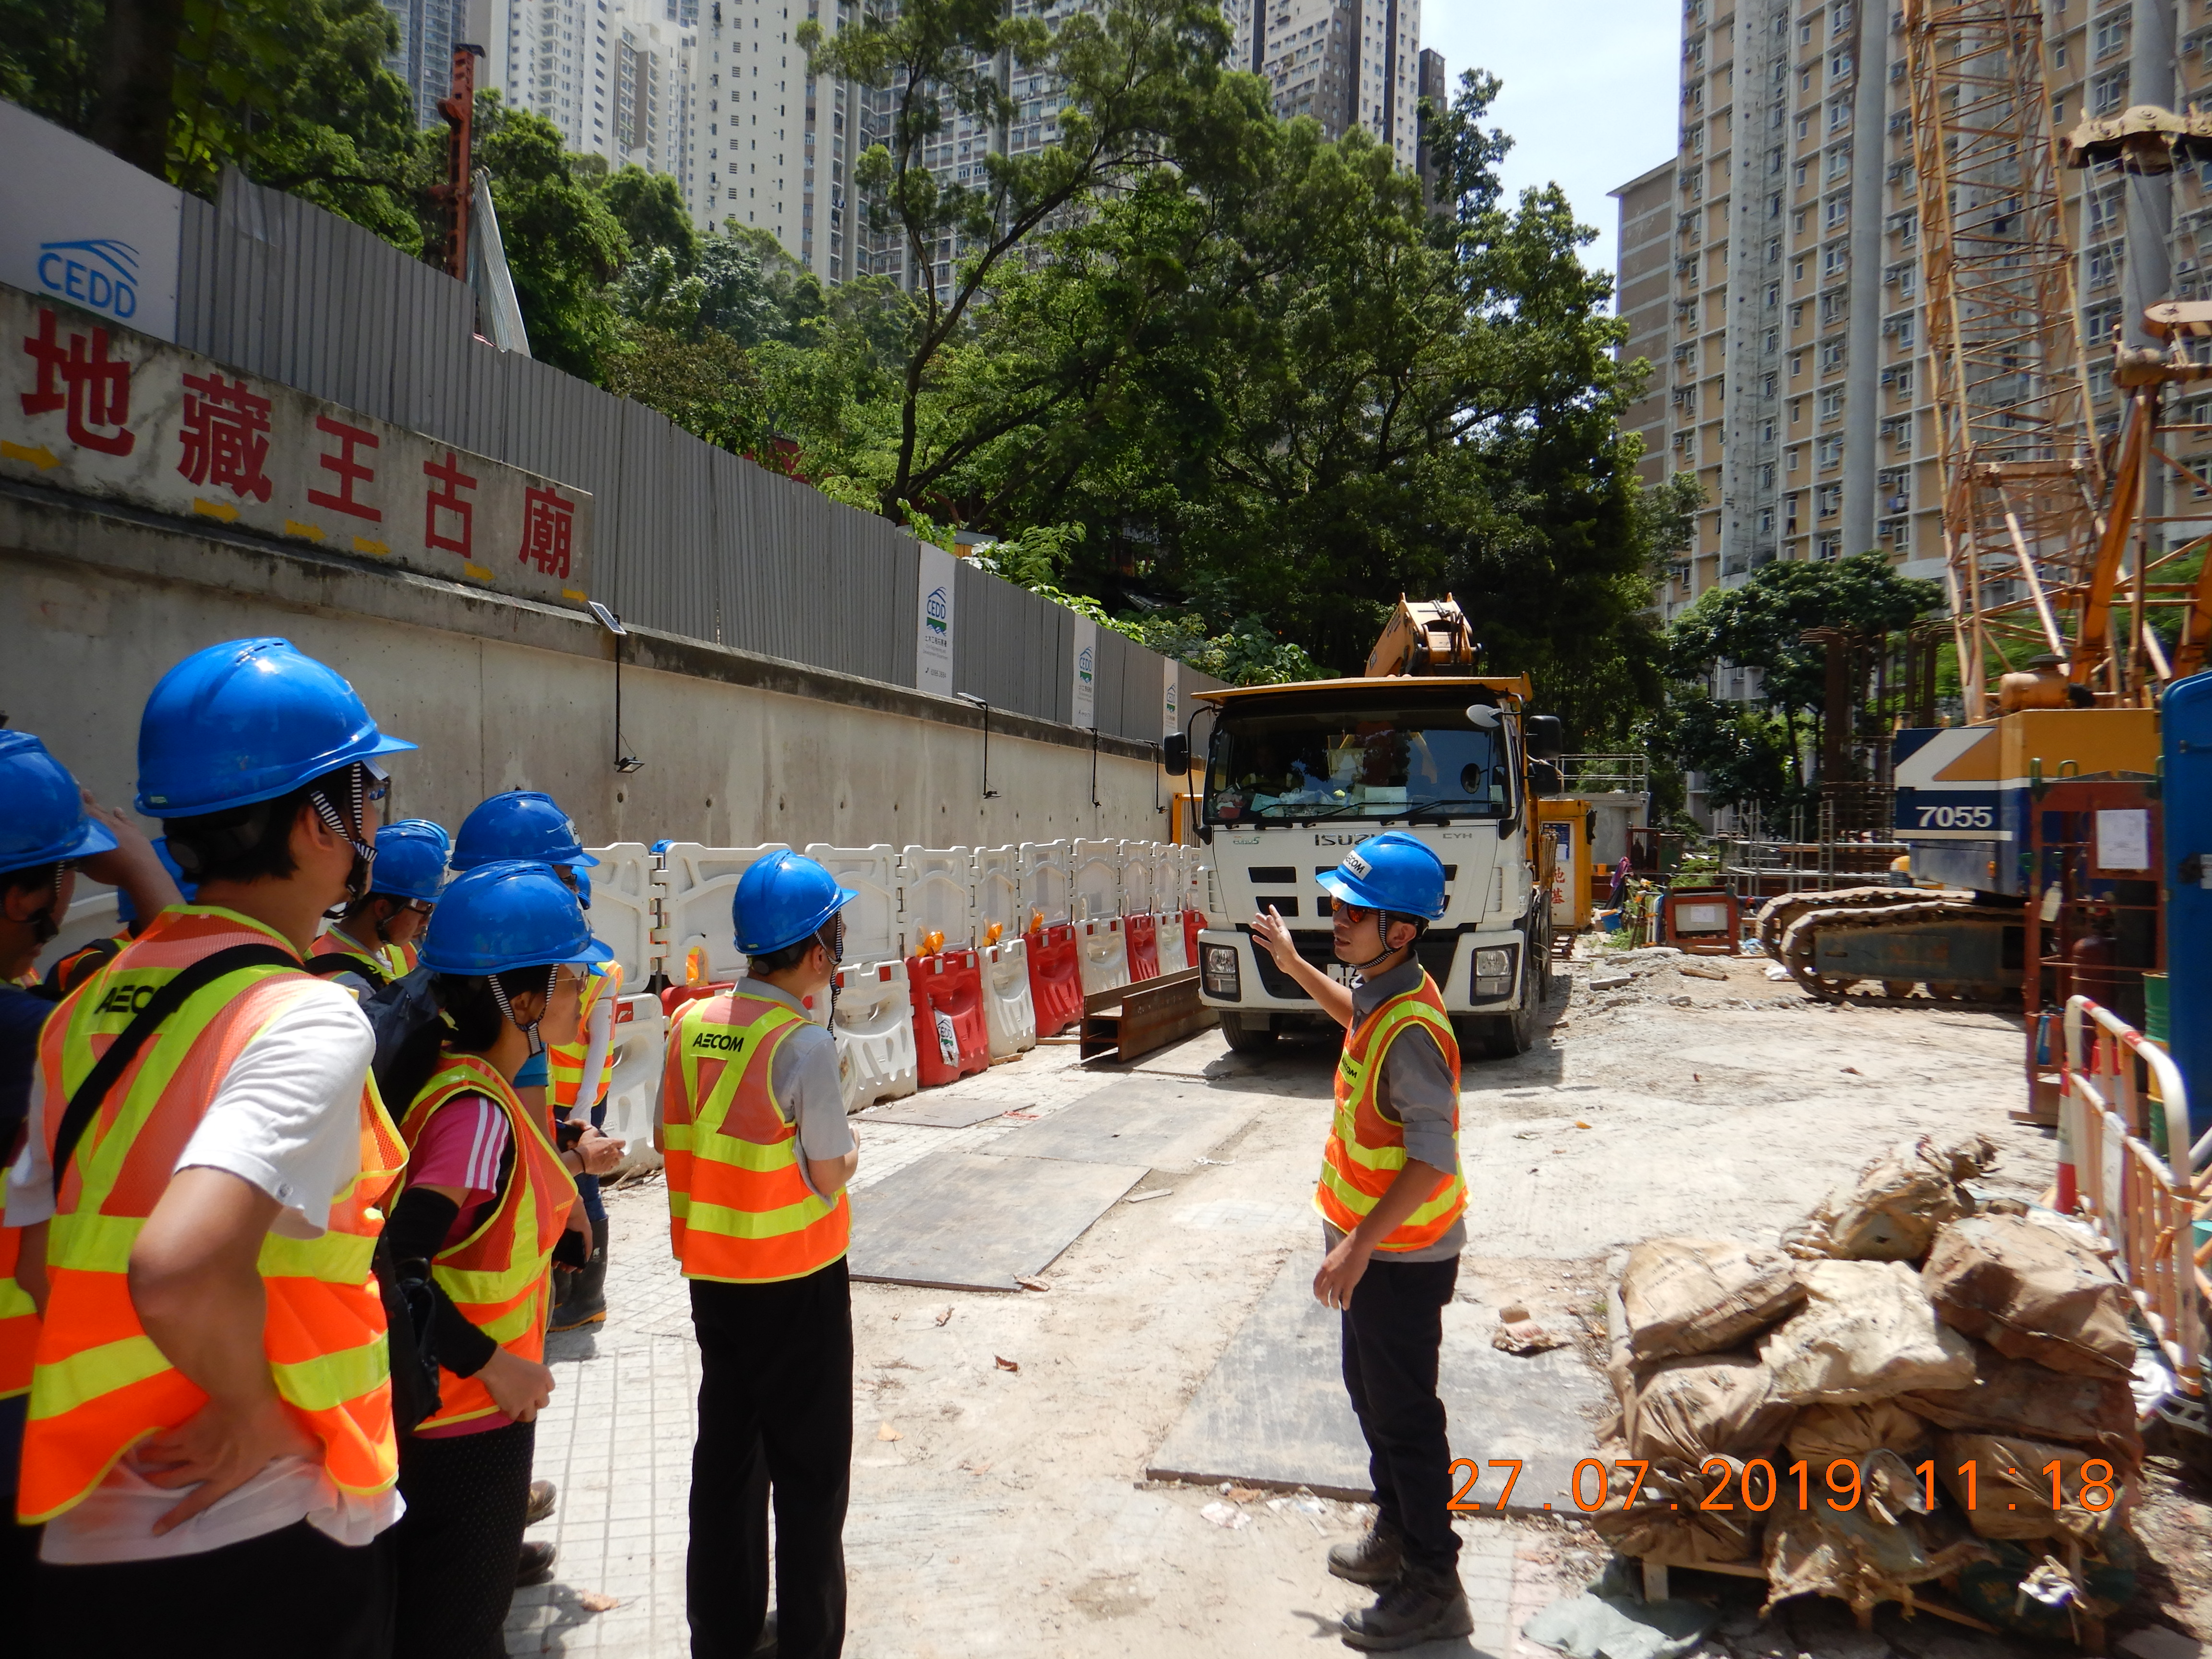 Site Visits - Members of the Hong Kong Institution of Engineers (HKIE) Geotechnical Division